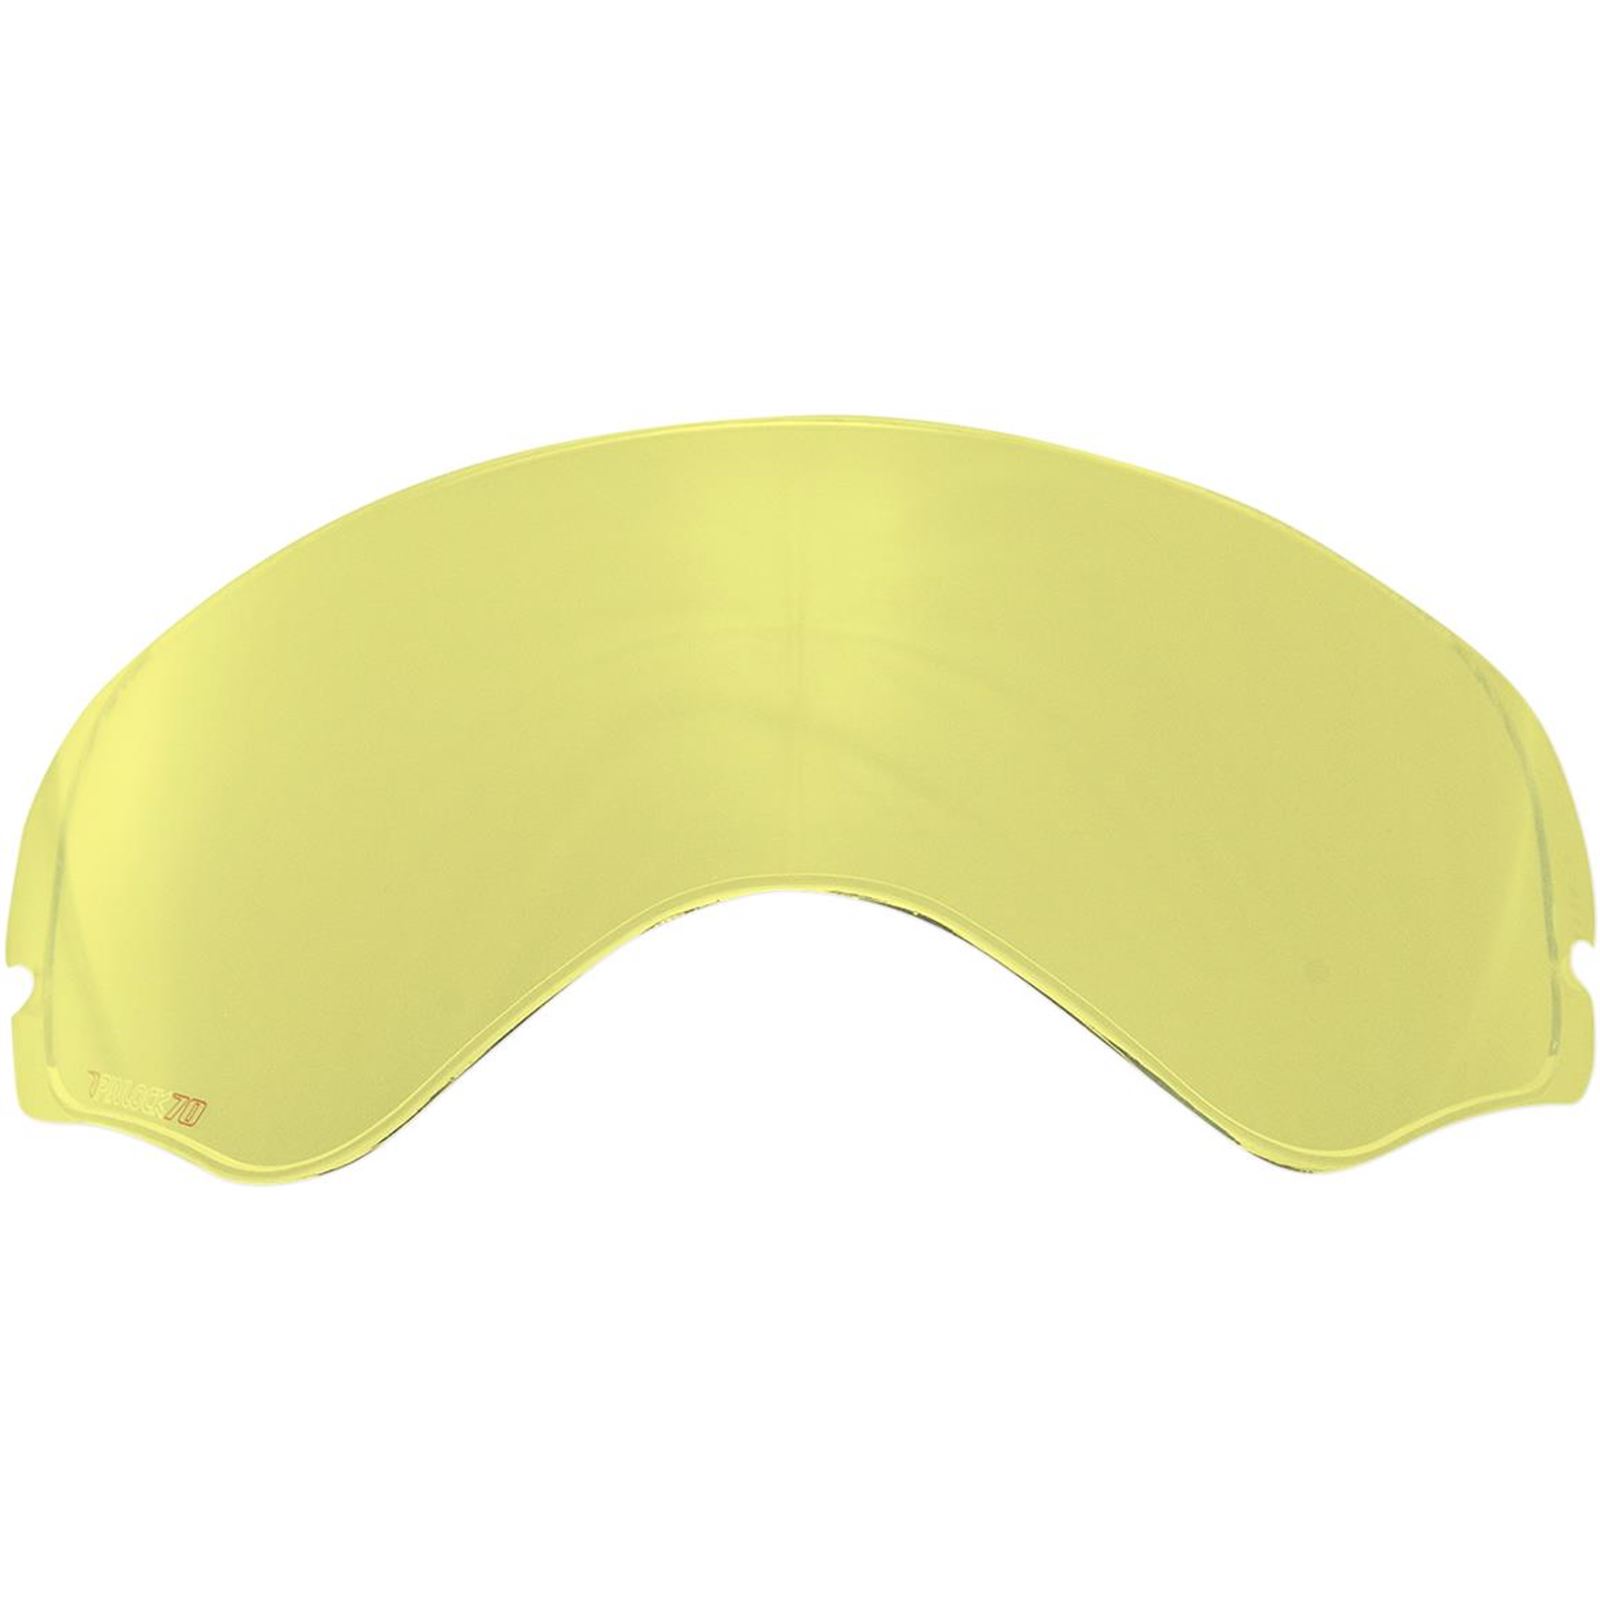 AFX FX-41DS Shield - Max Pinlock Lens 70 - Yellow